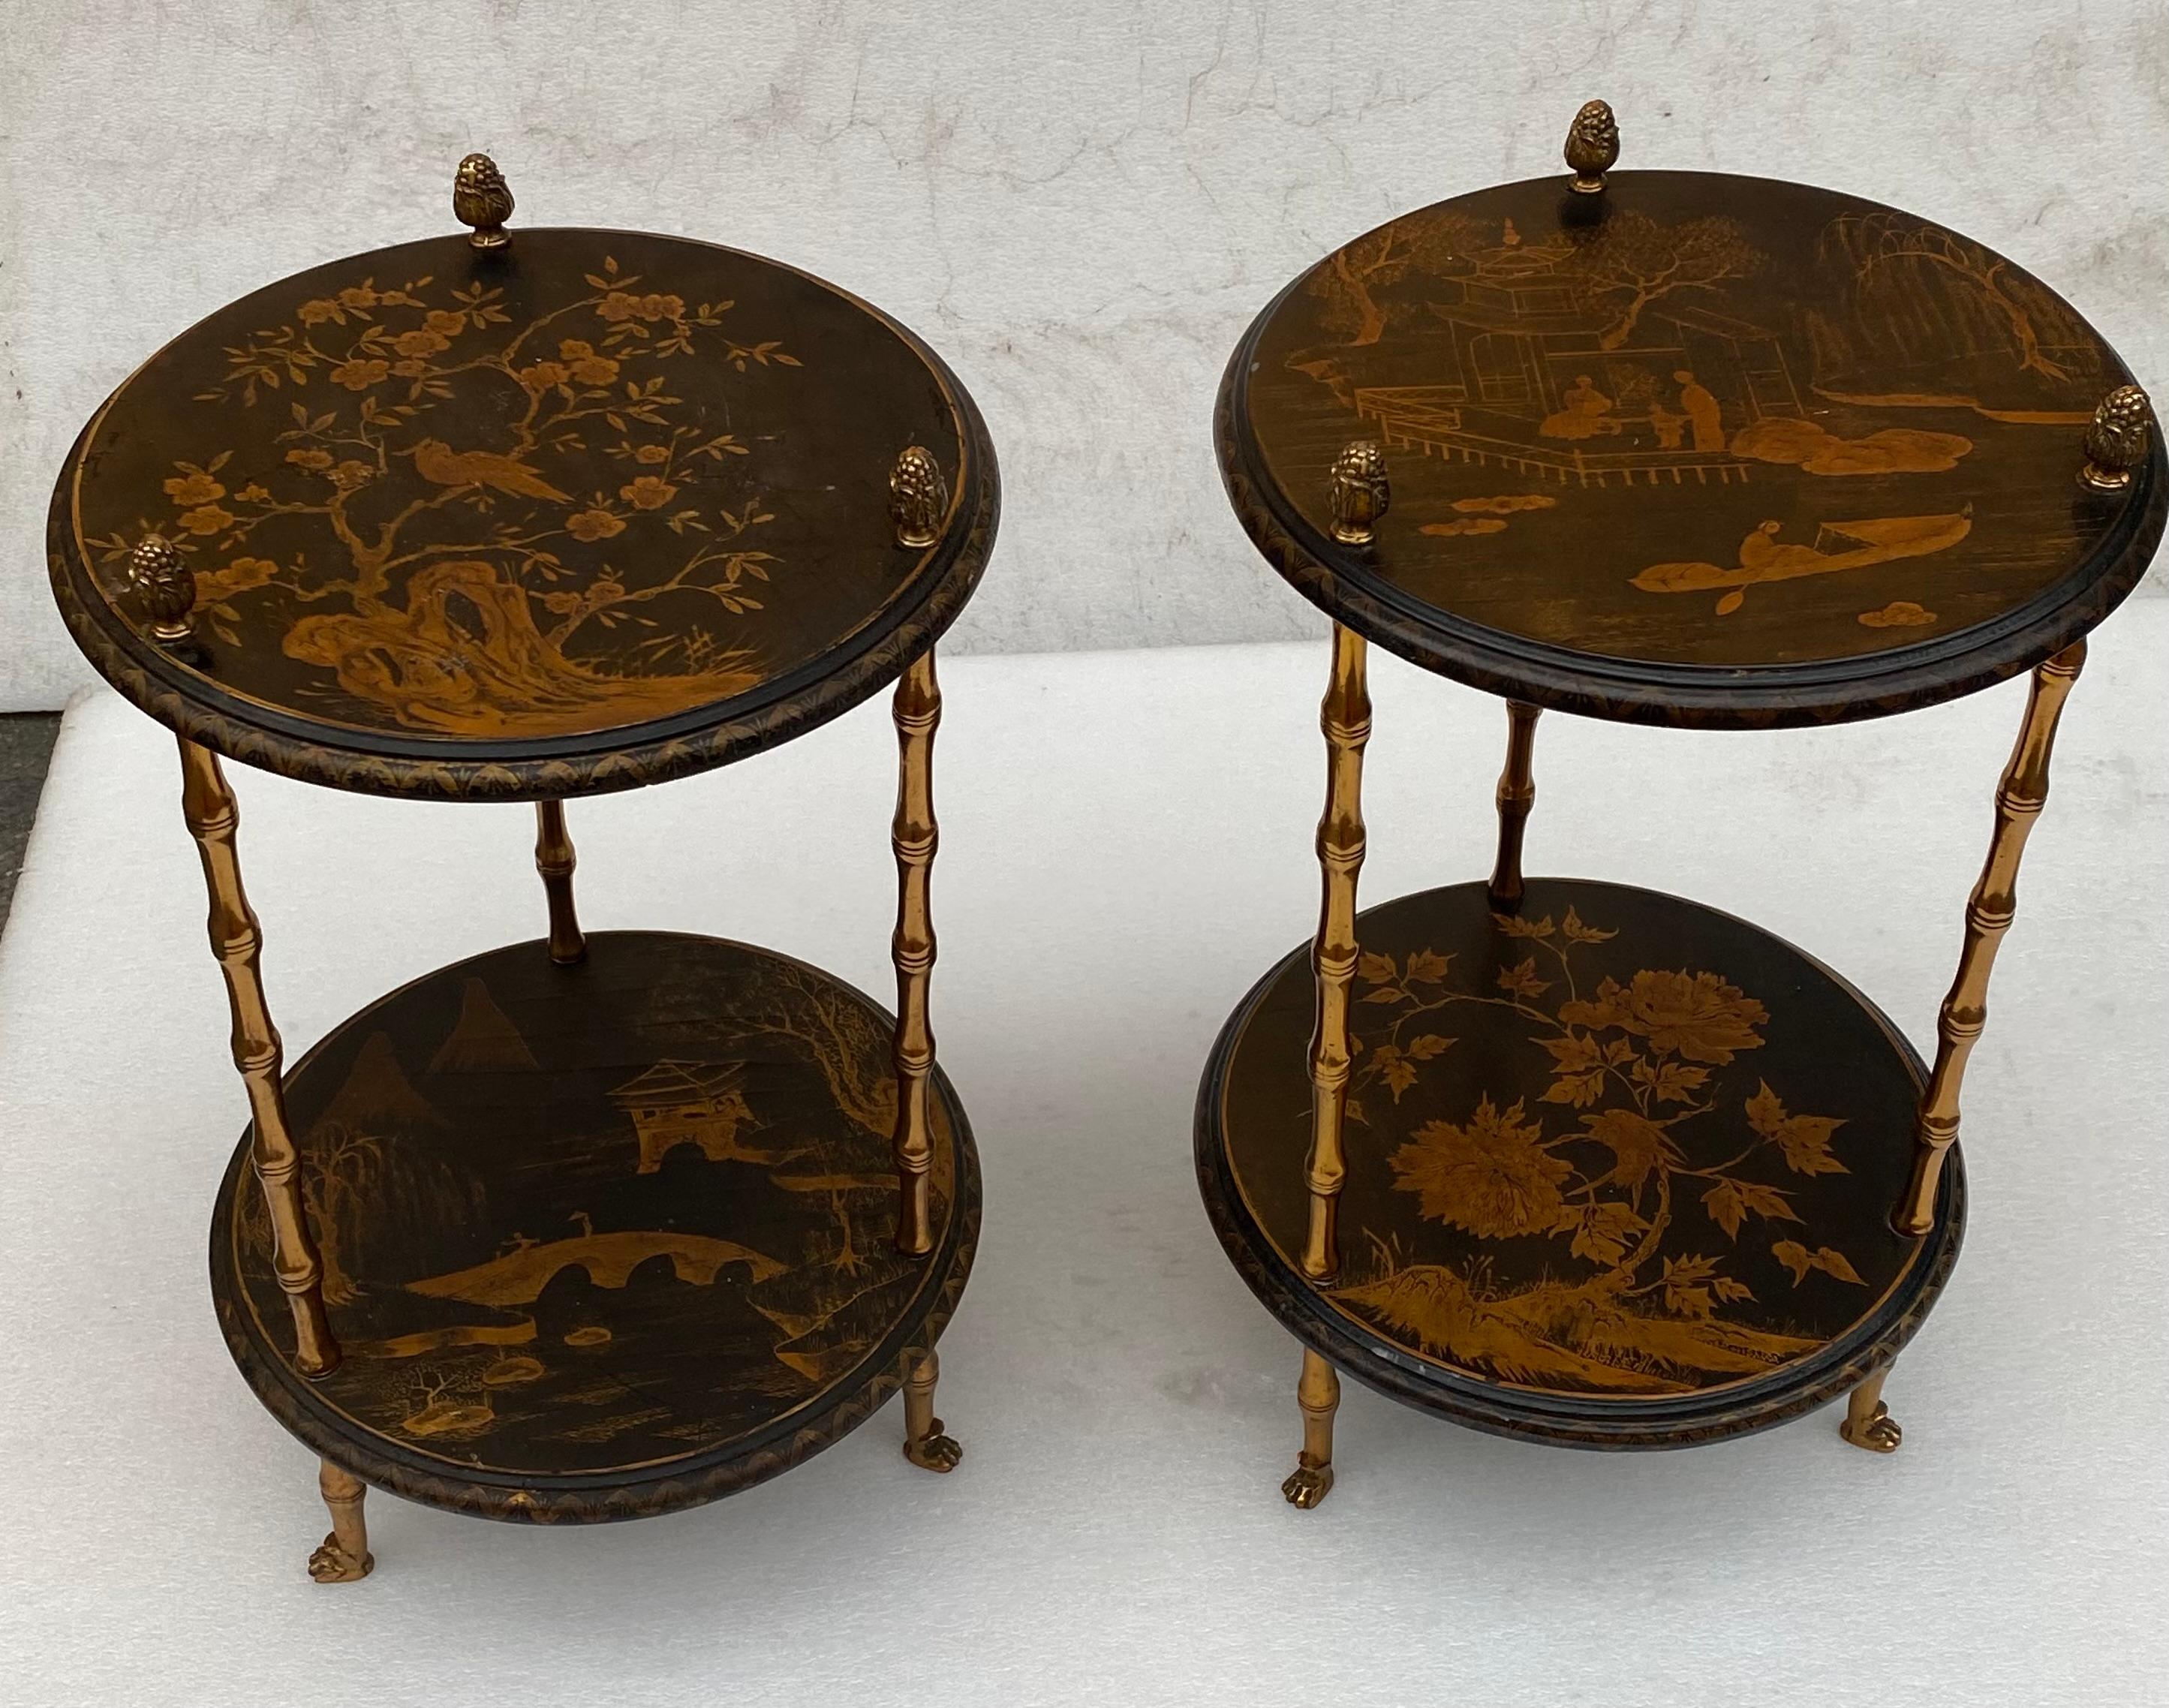 Pair of Tables or similar in gilded bronze with bamboo decor, claw feet with Chinese lacquered wooden tops with landscape decoration, characters with life scenes, pine cones at the end of the uprights
Circa 1950/70,
condition of use
Everything is